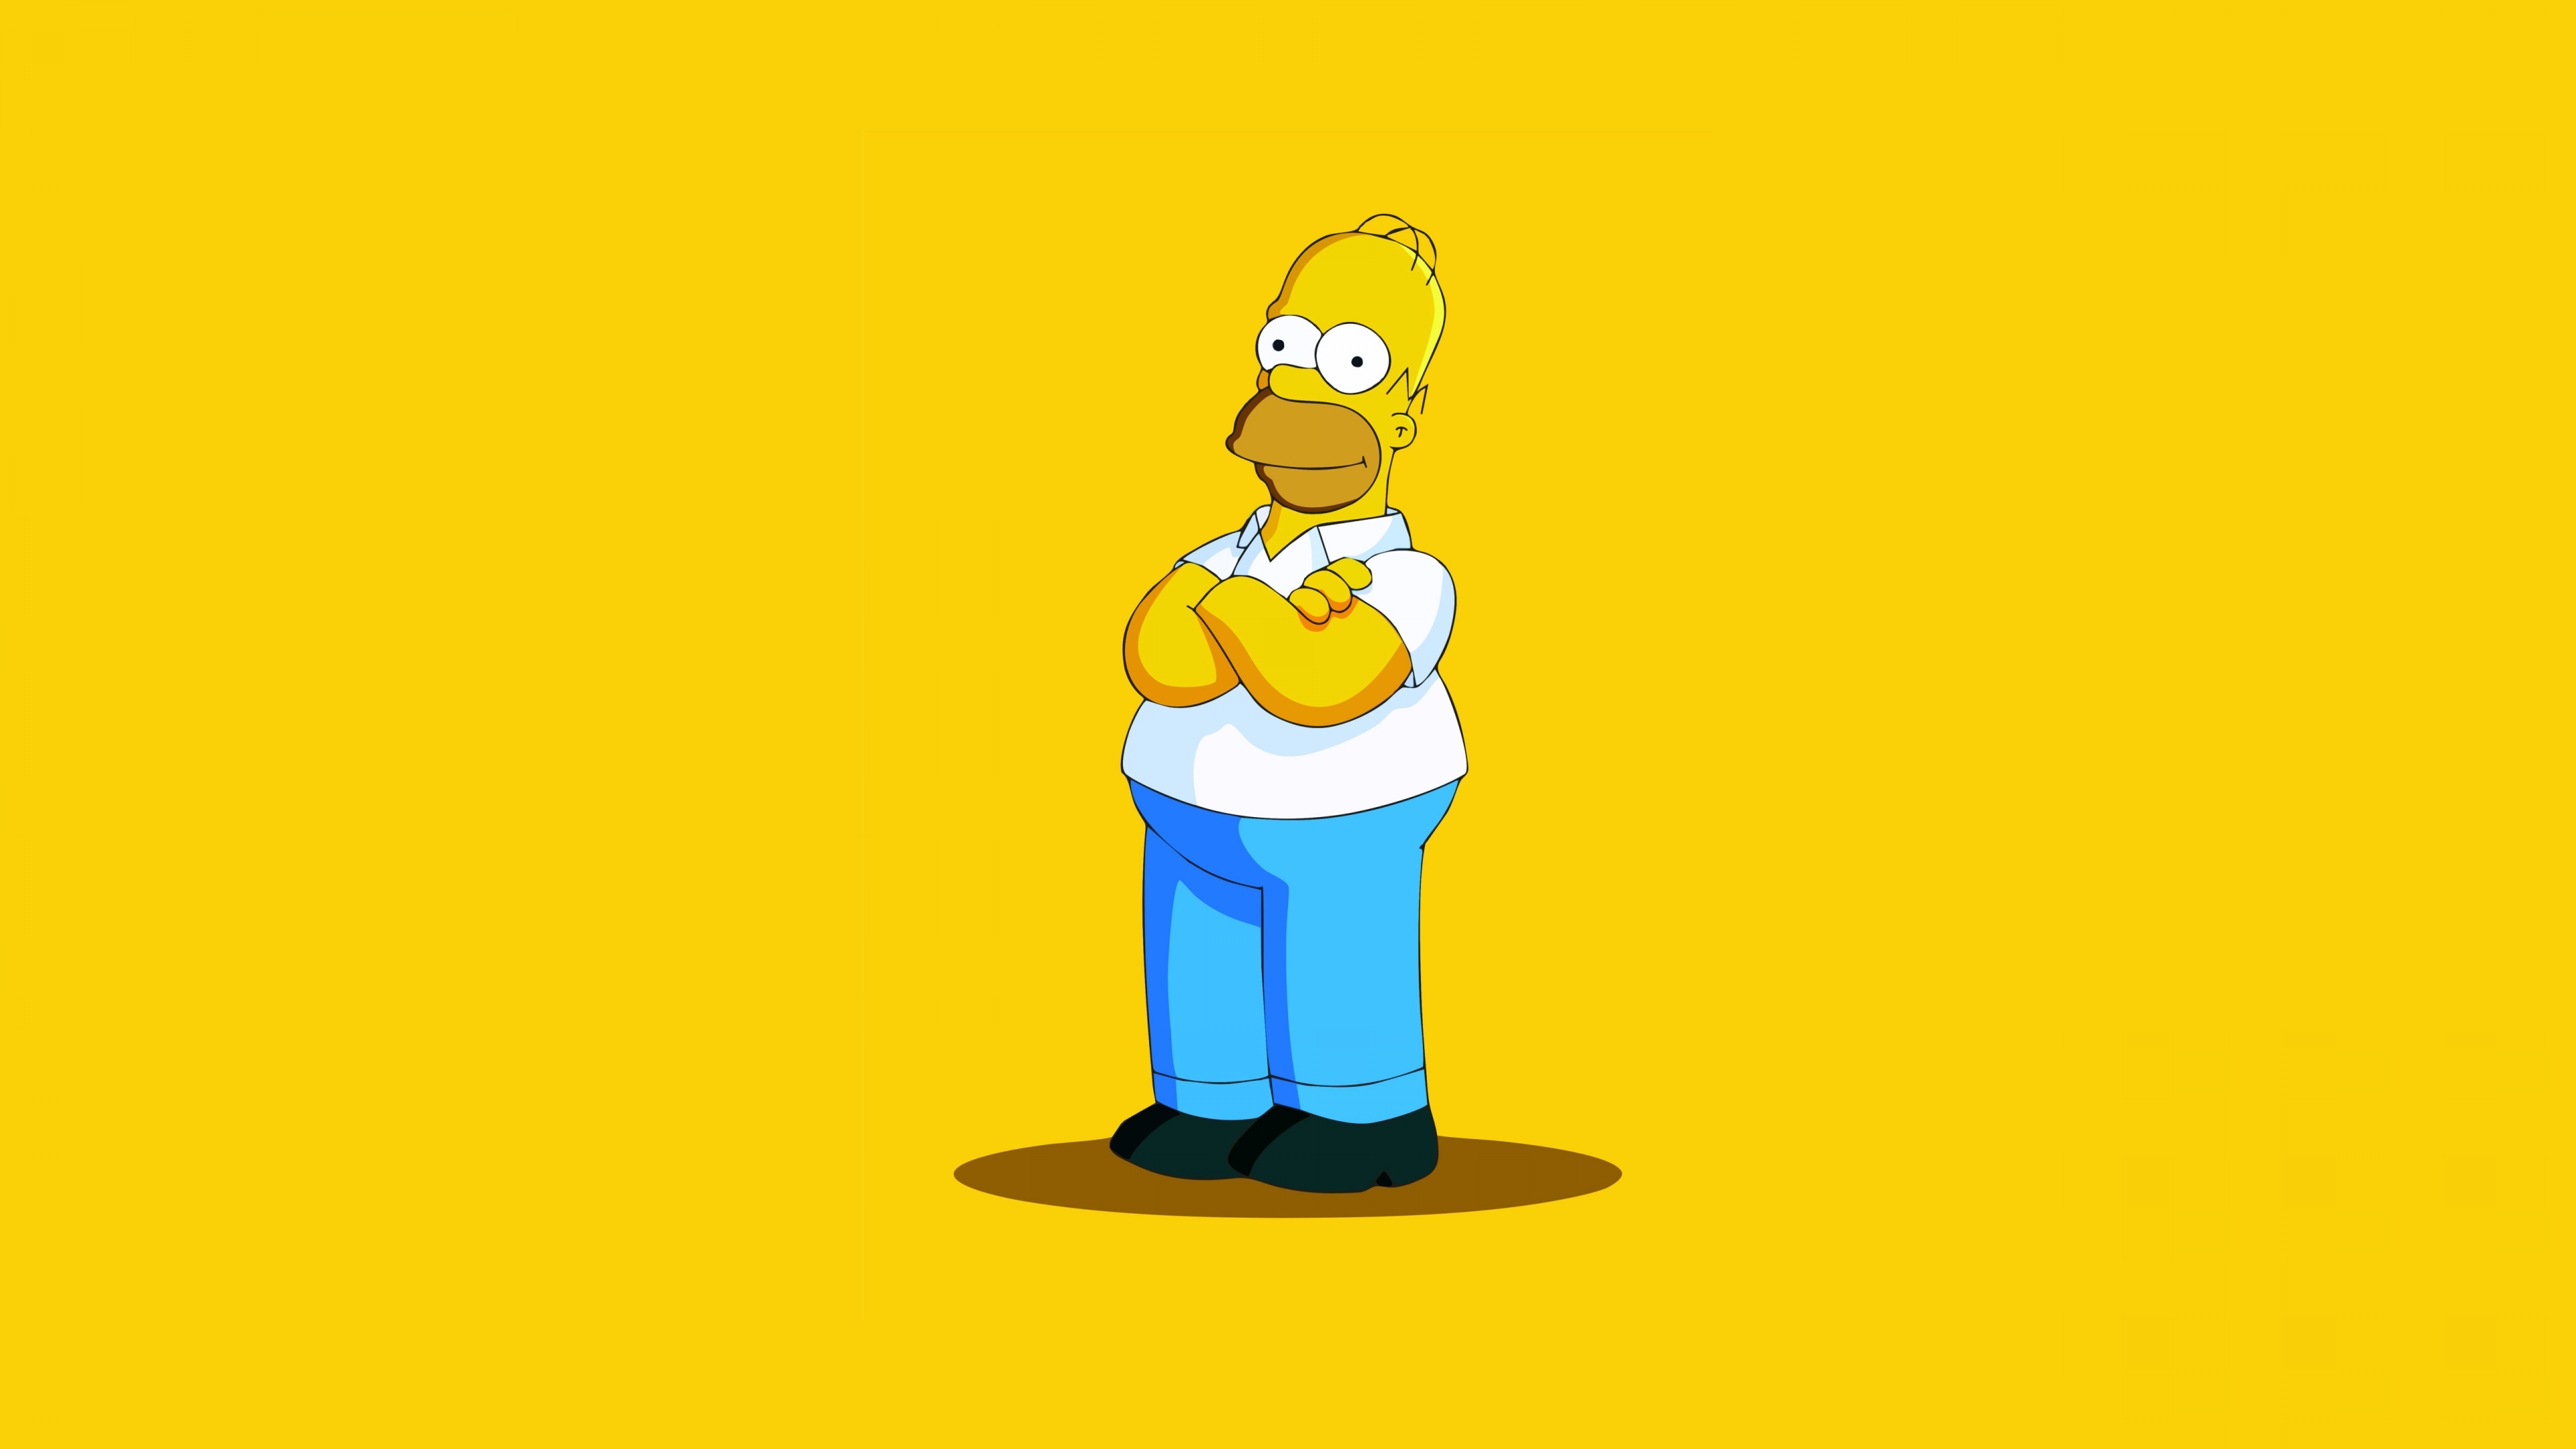 Simpsons Wallpapers Backgrounds Infoupdate Org